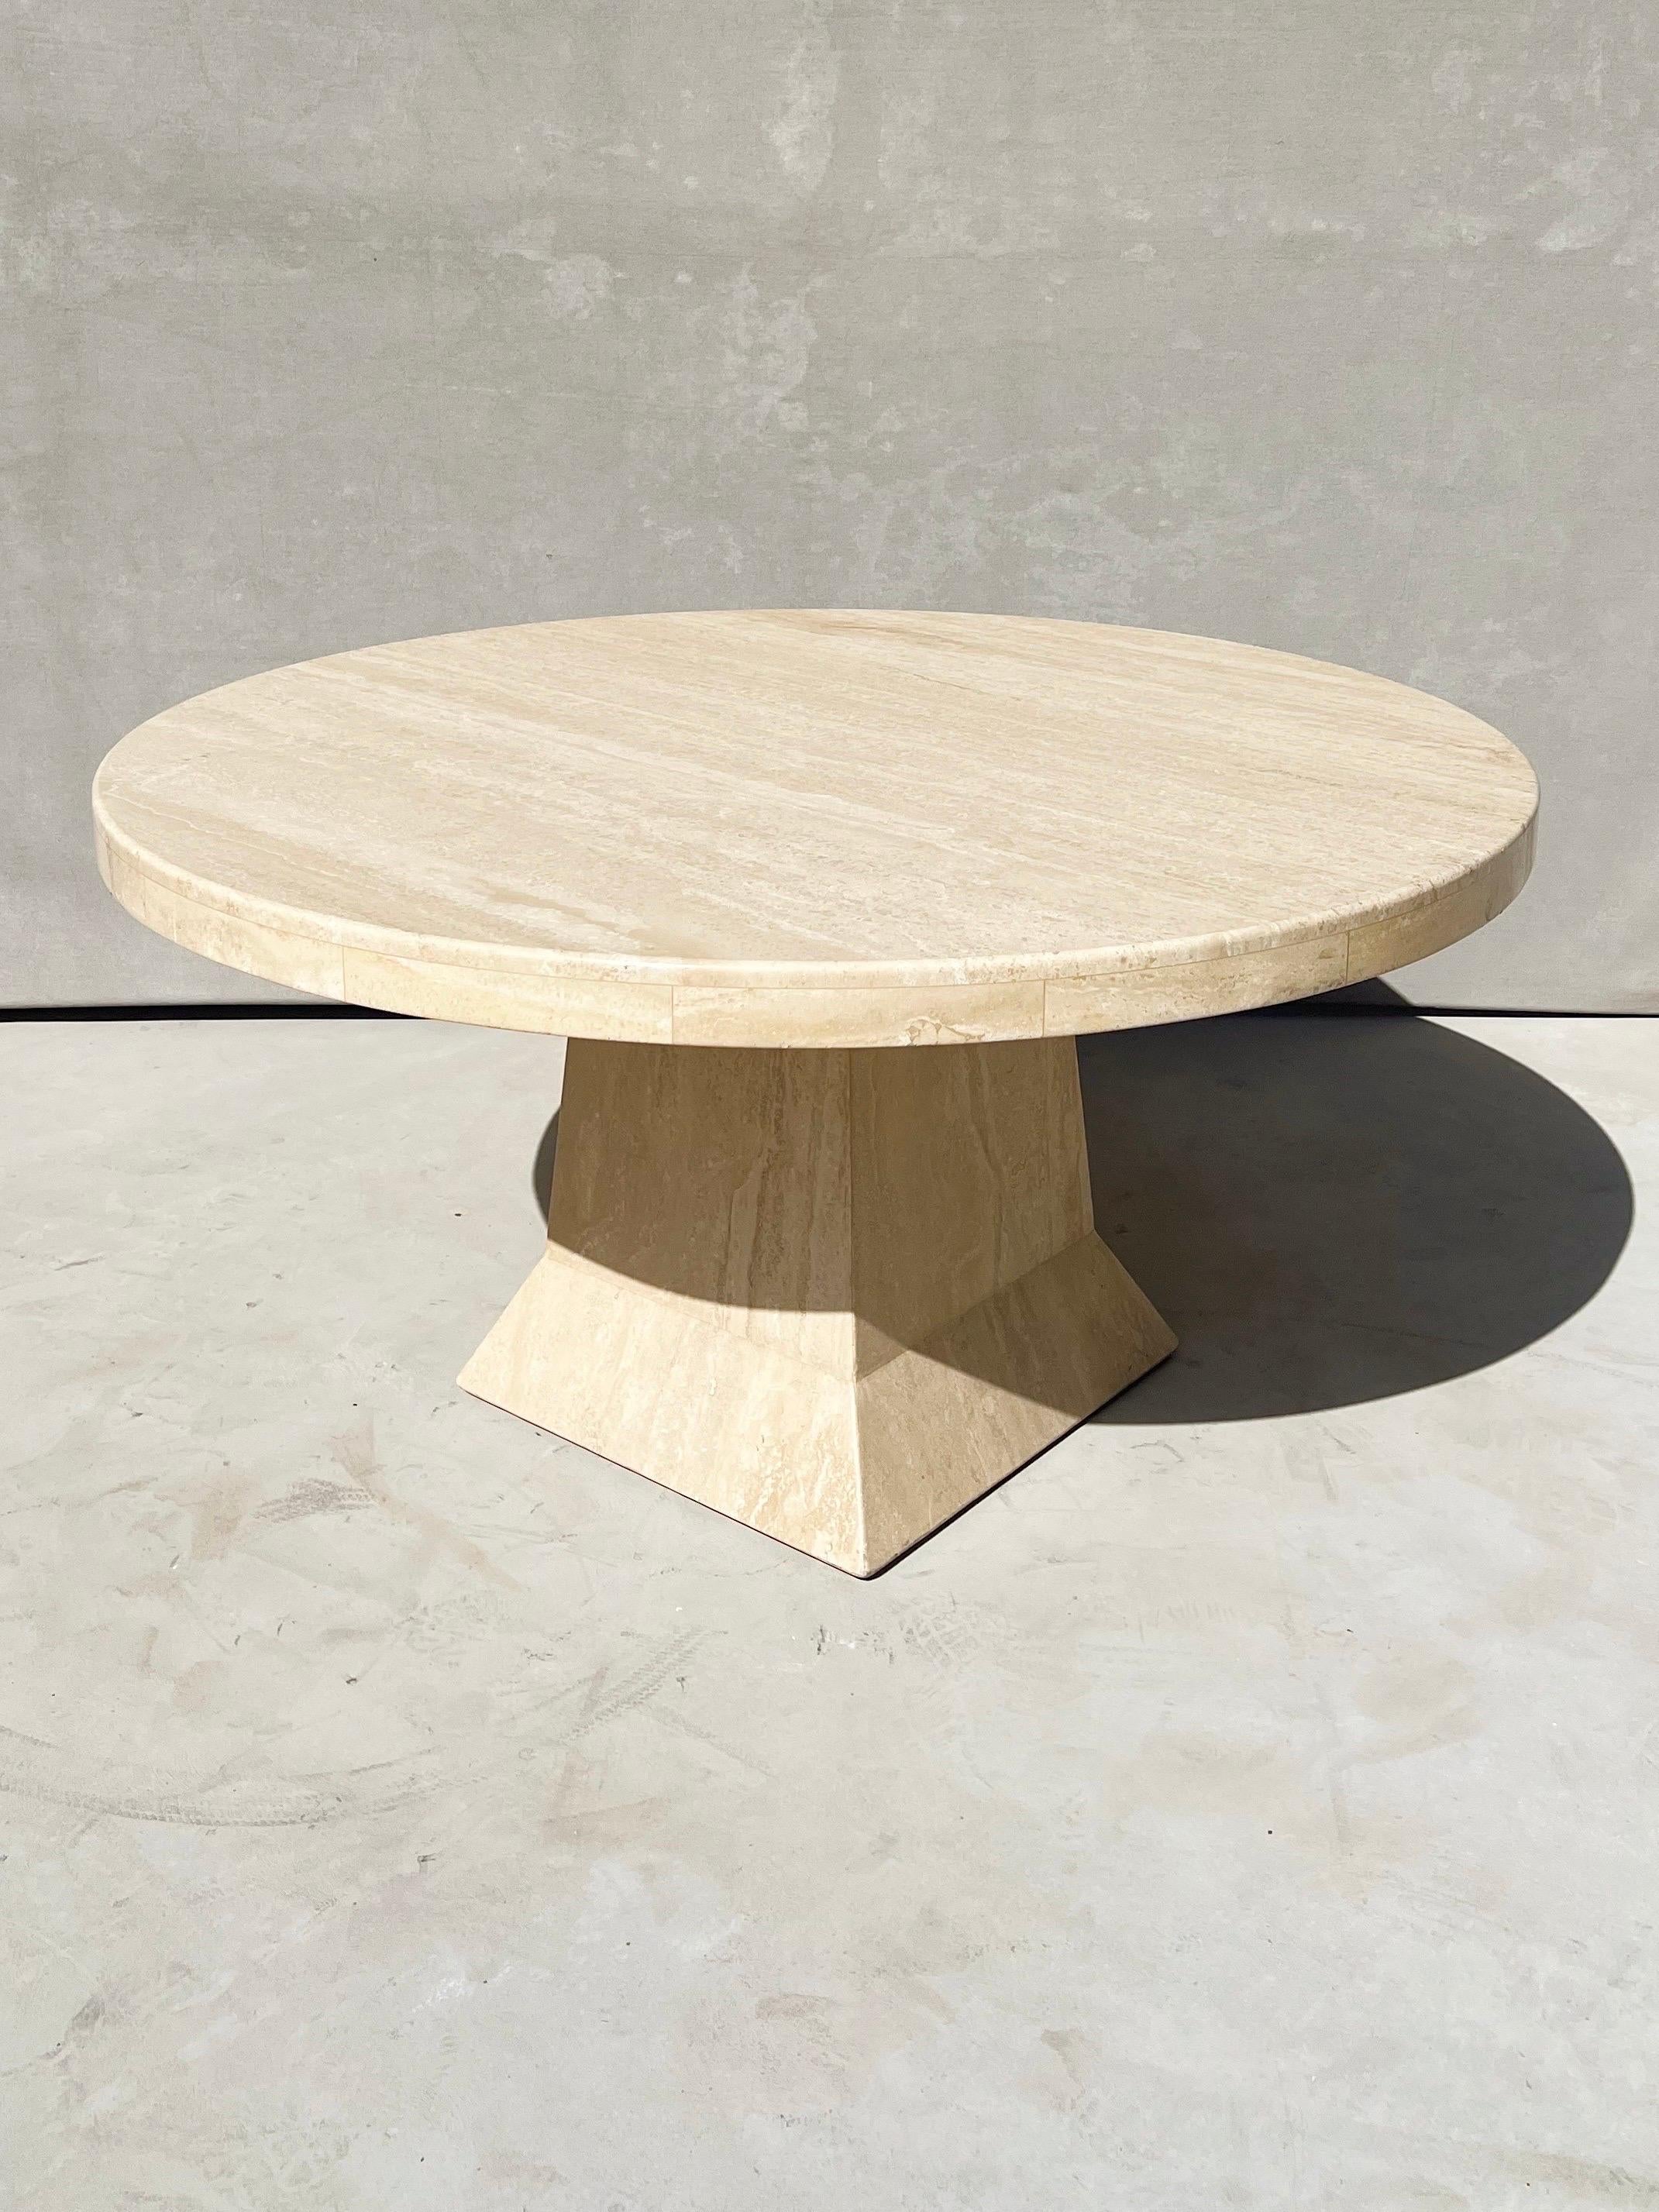 Vintage Italian Travertine round dining table with sculptural base.

An Italian travertine round dining table with even veins in colors of pearl, white, cream, soft beige, almond and cashew.

This dining table has a light to medium gloss which